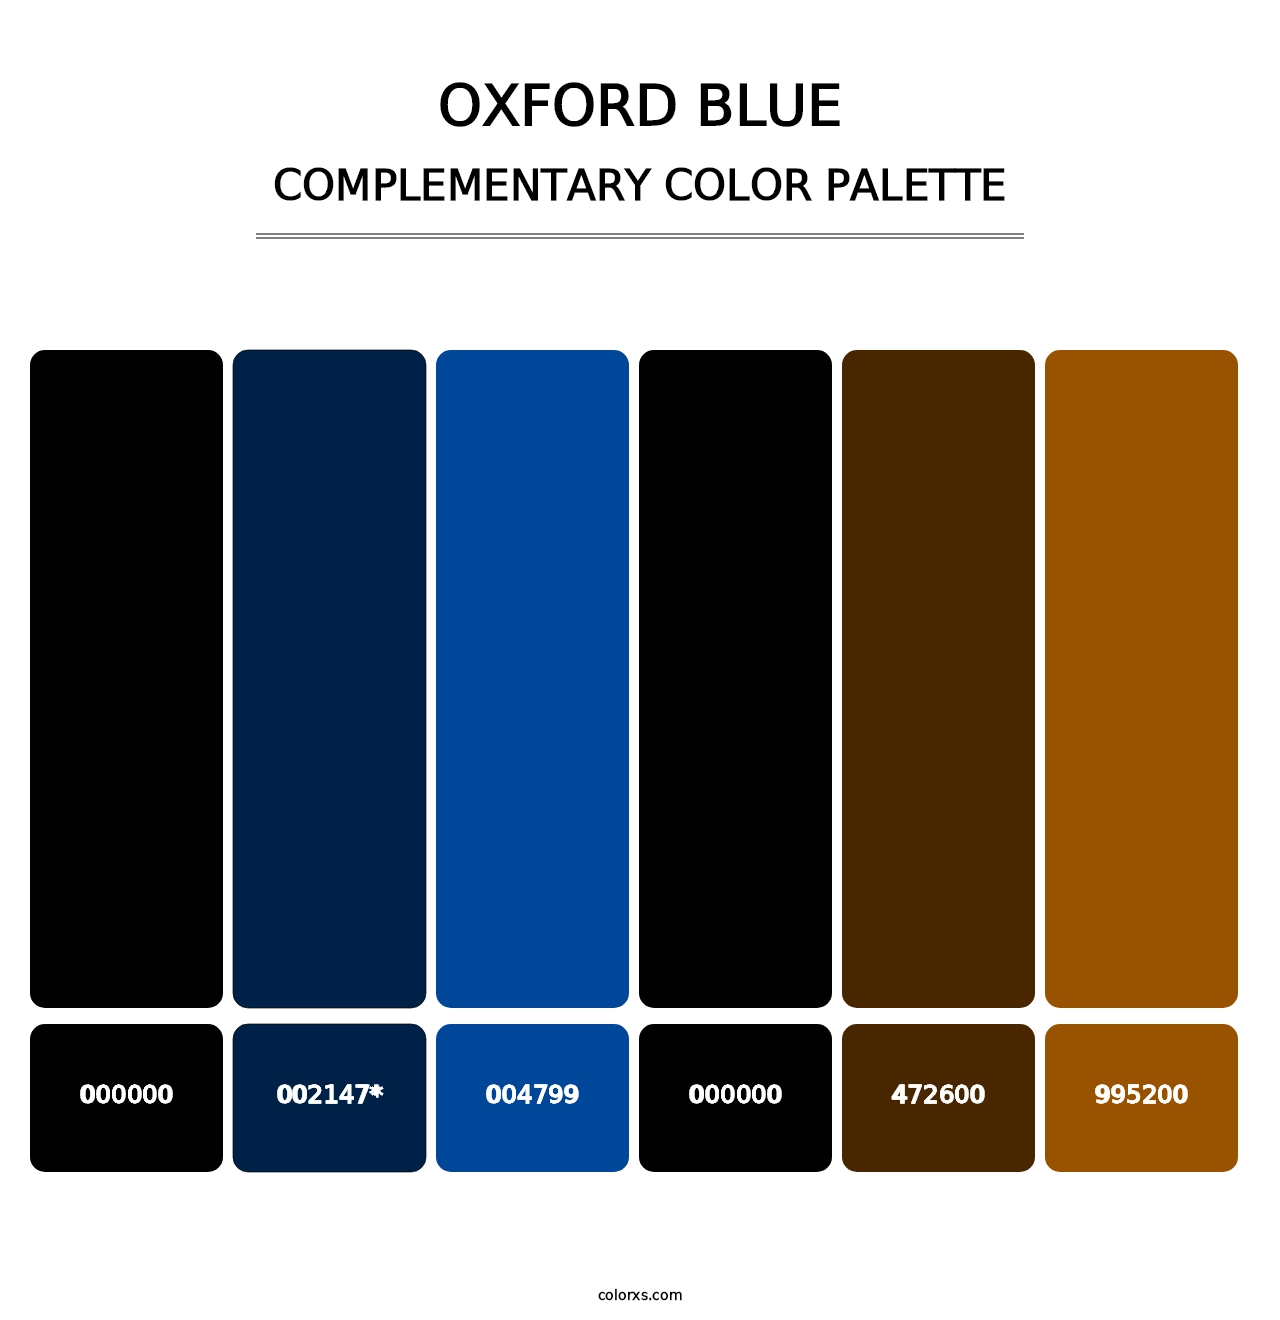 Oxford Blue - Complementary Color Palette